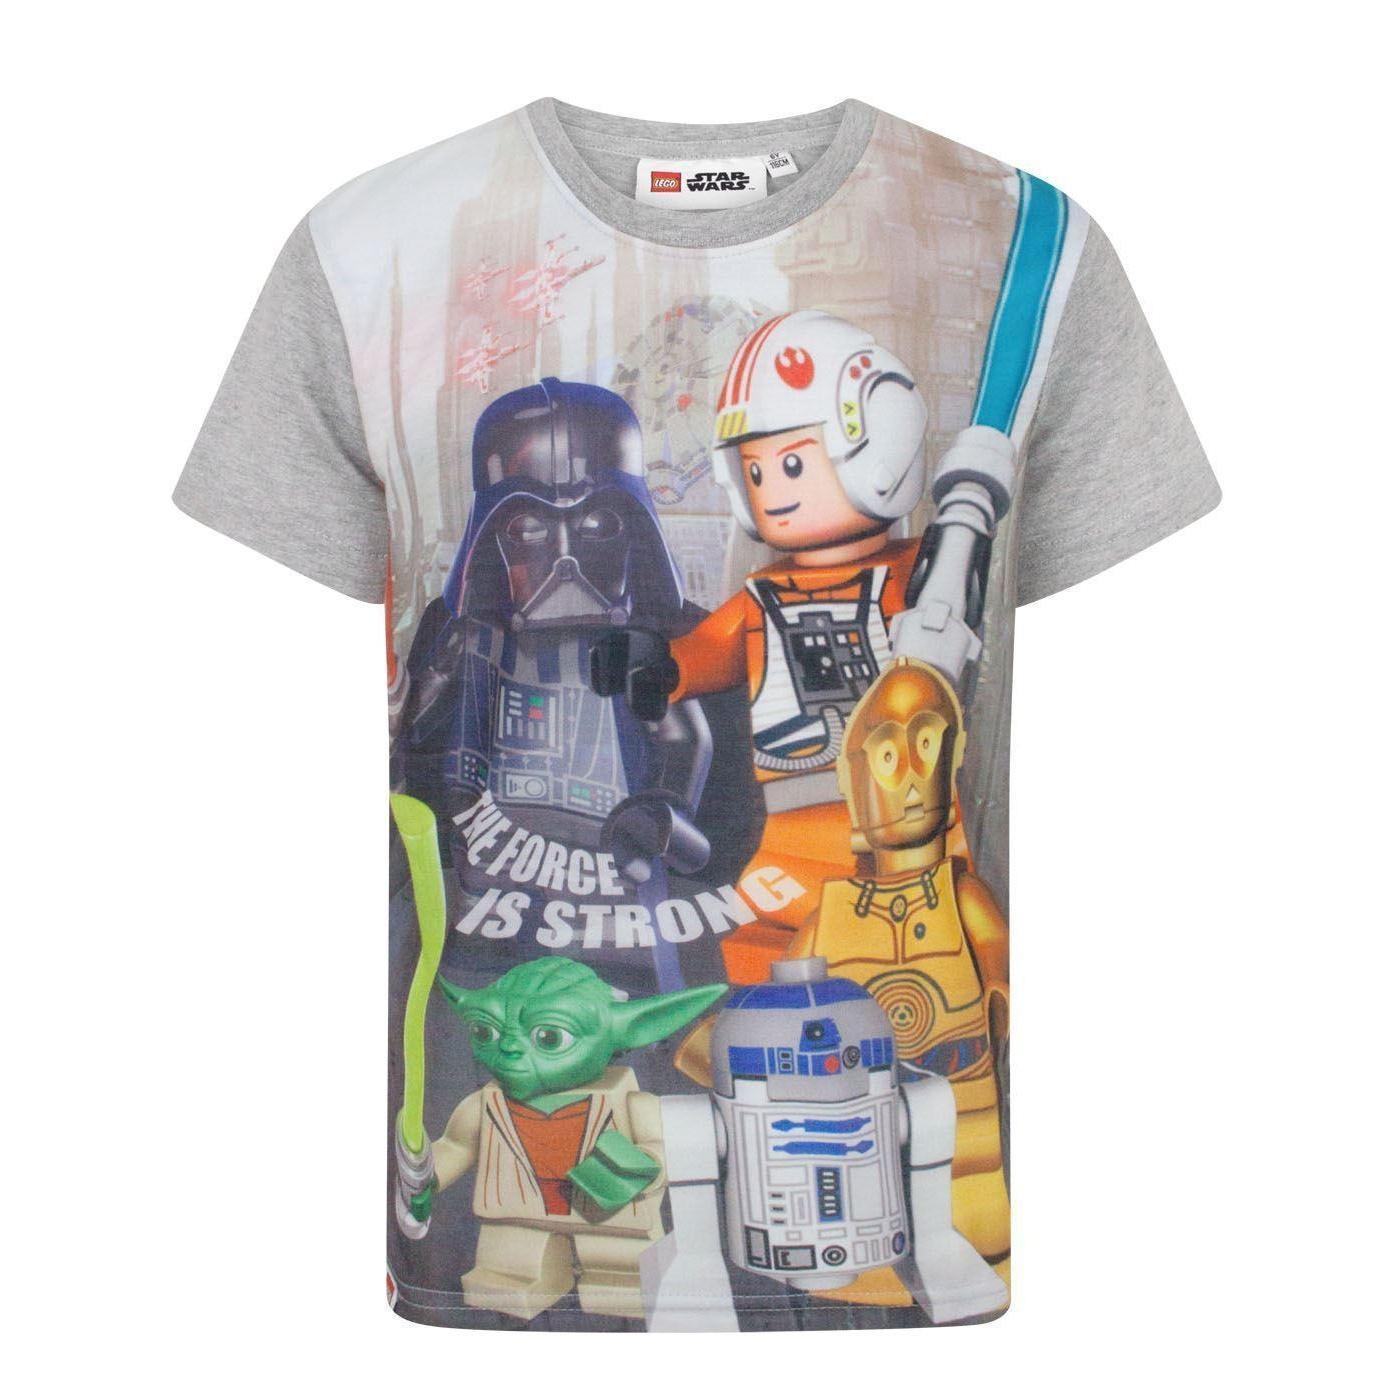 Lego Star Wars Boys The Force Is Strong T-Shirt (Grey) (4 Years)